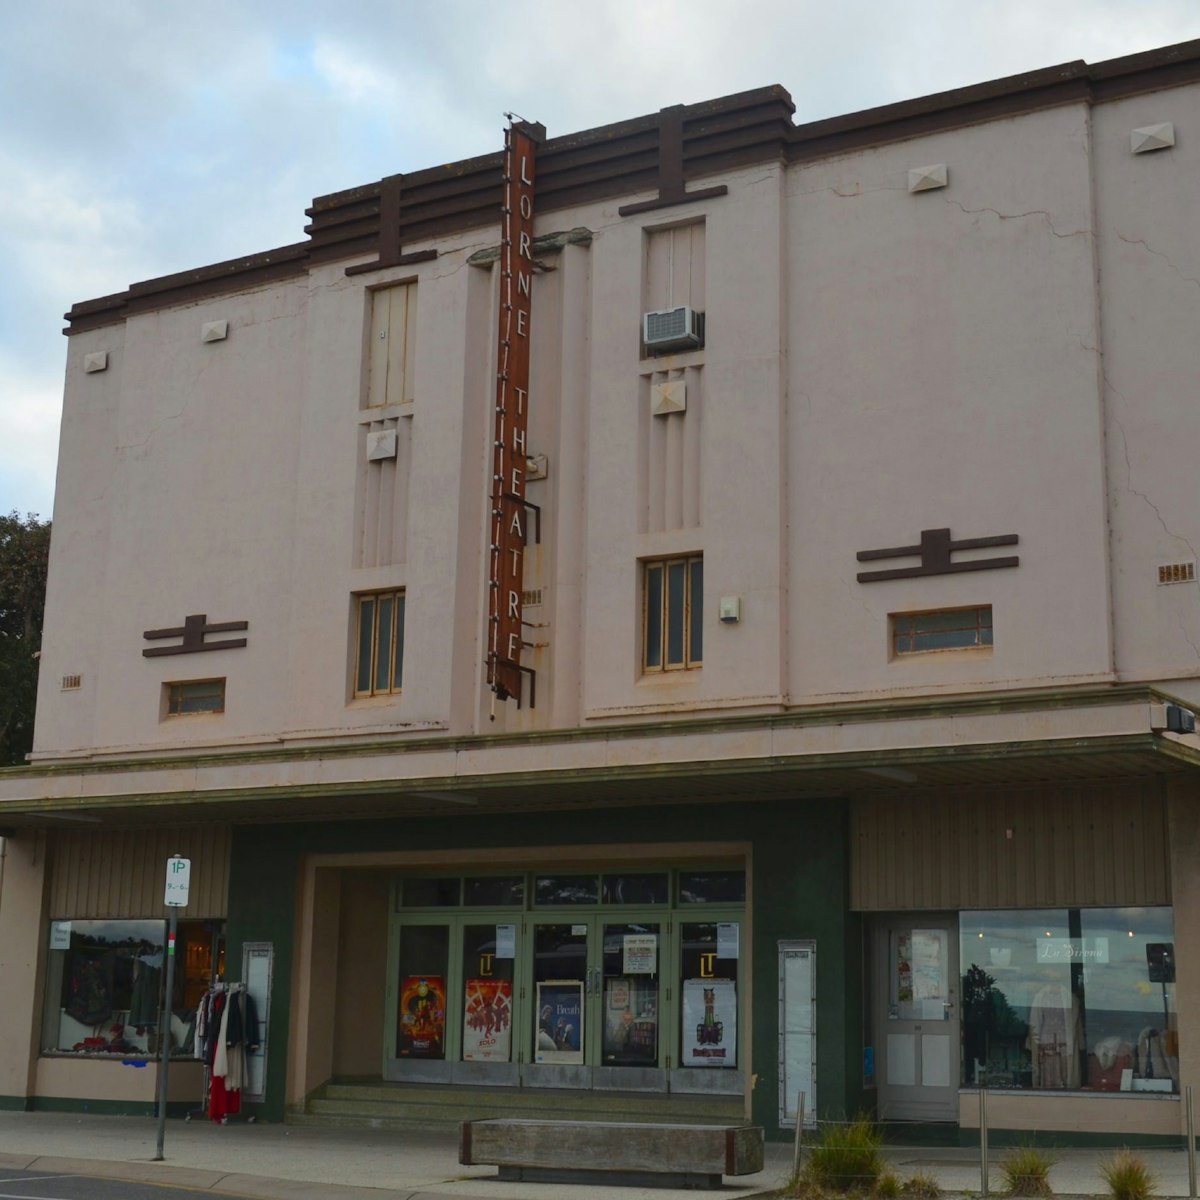 Shot of Lorne Theatre building on the town's main street.